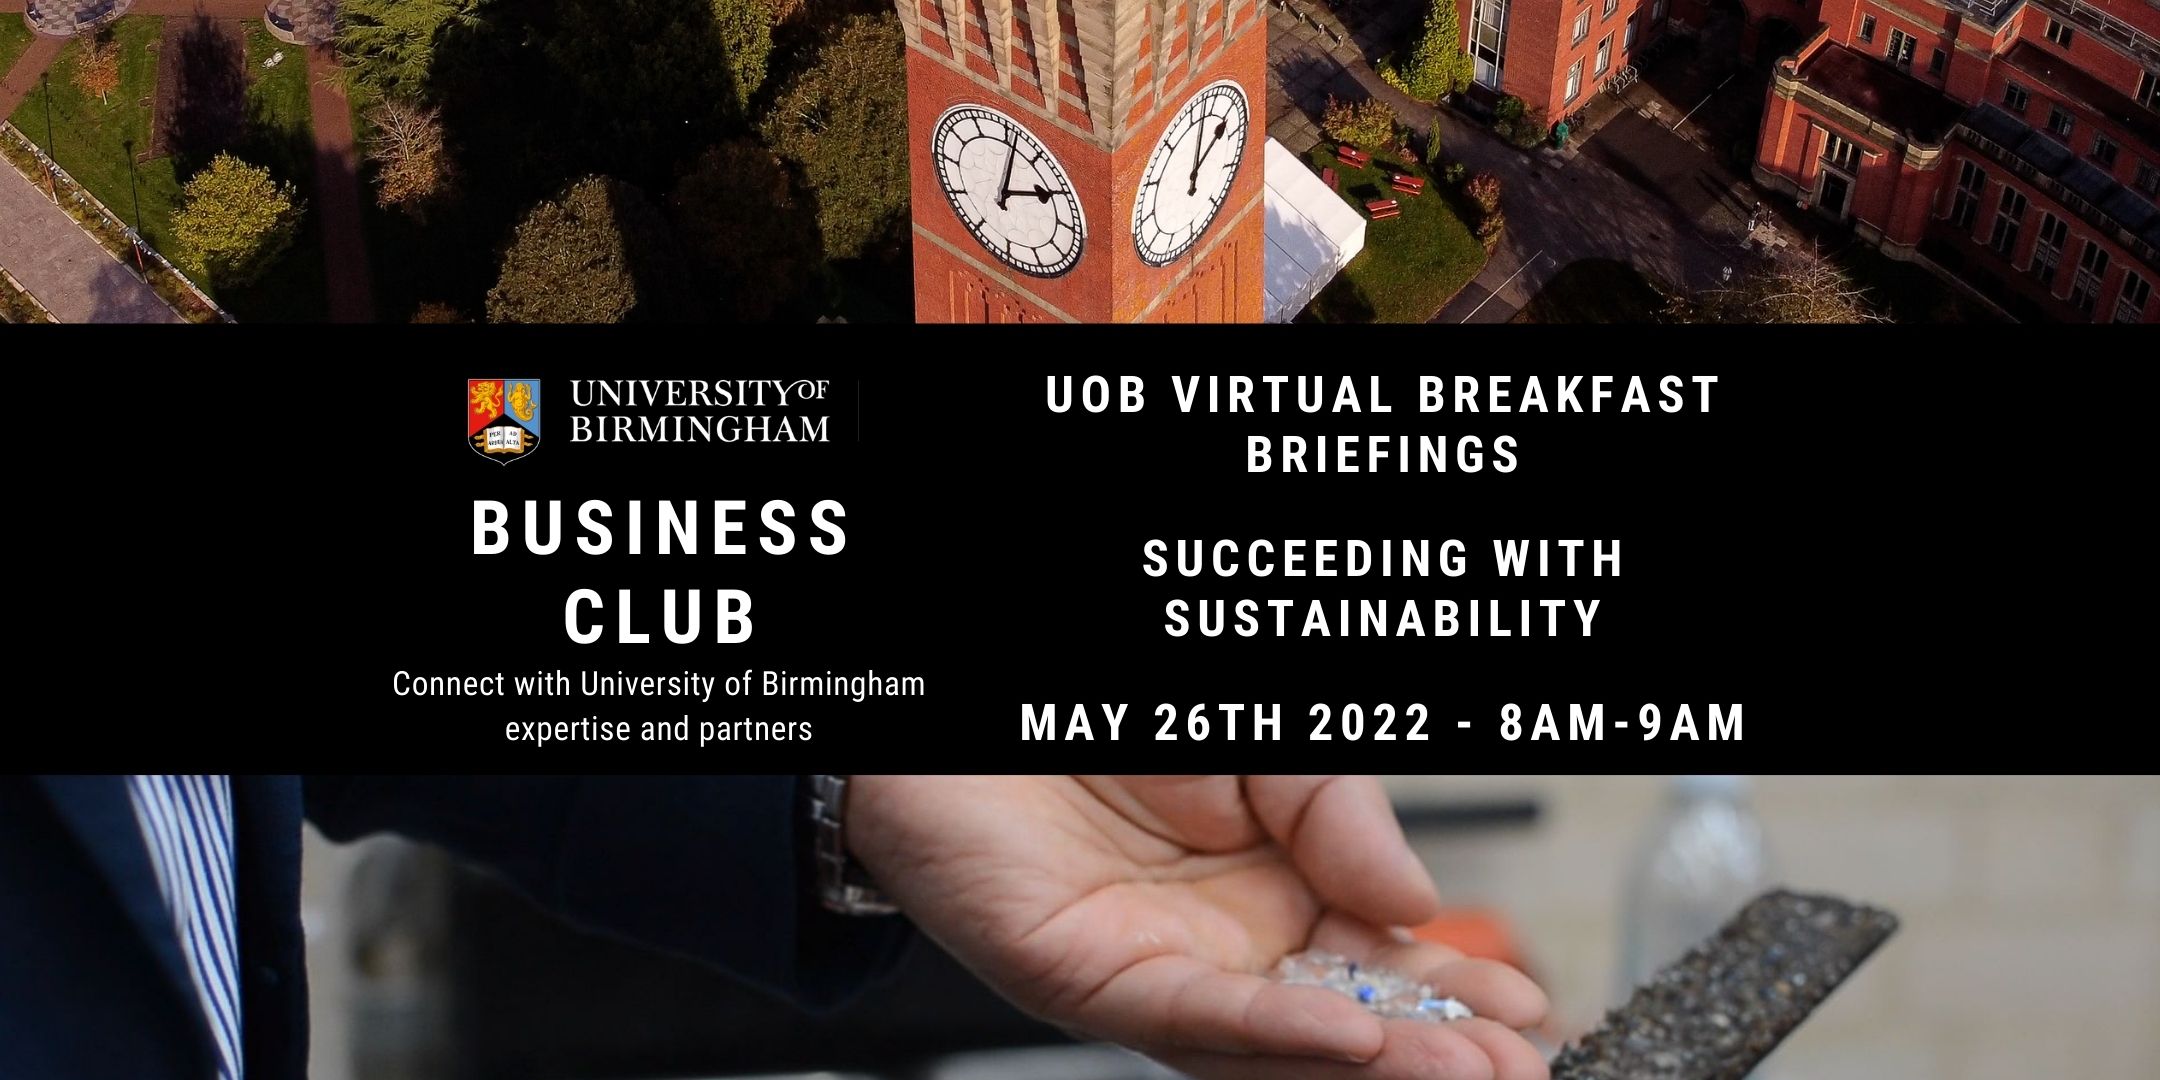 Uob Business Club -  Virtual Breakfast Briefings  Succeeding with Sustainability  May 26th 2022 - 8am-9am